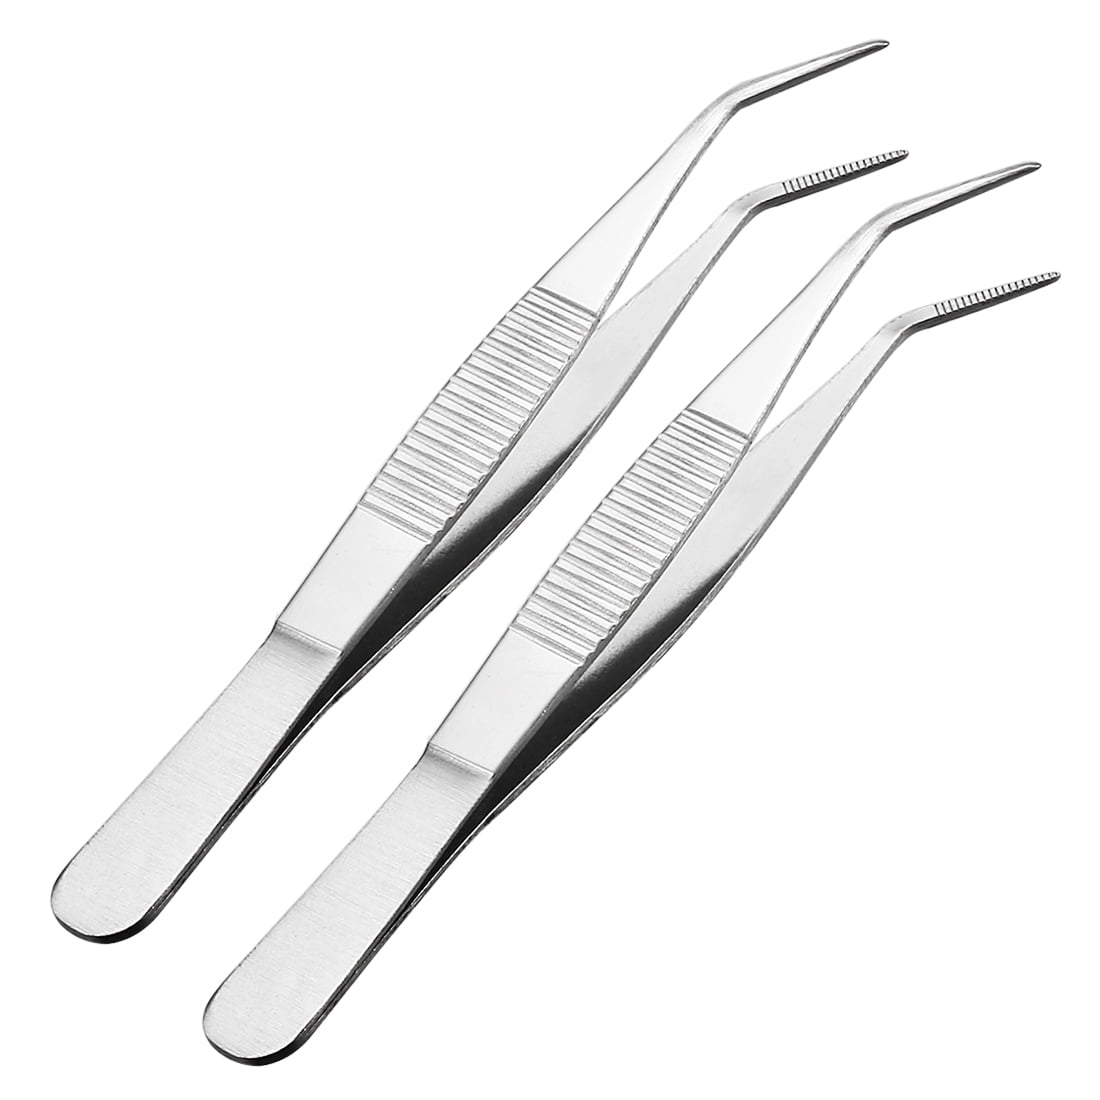 Stainless Steel Tweezers Point Serrated Tips 6 Curved for Art Class Supplies DIY Tool